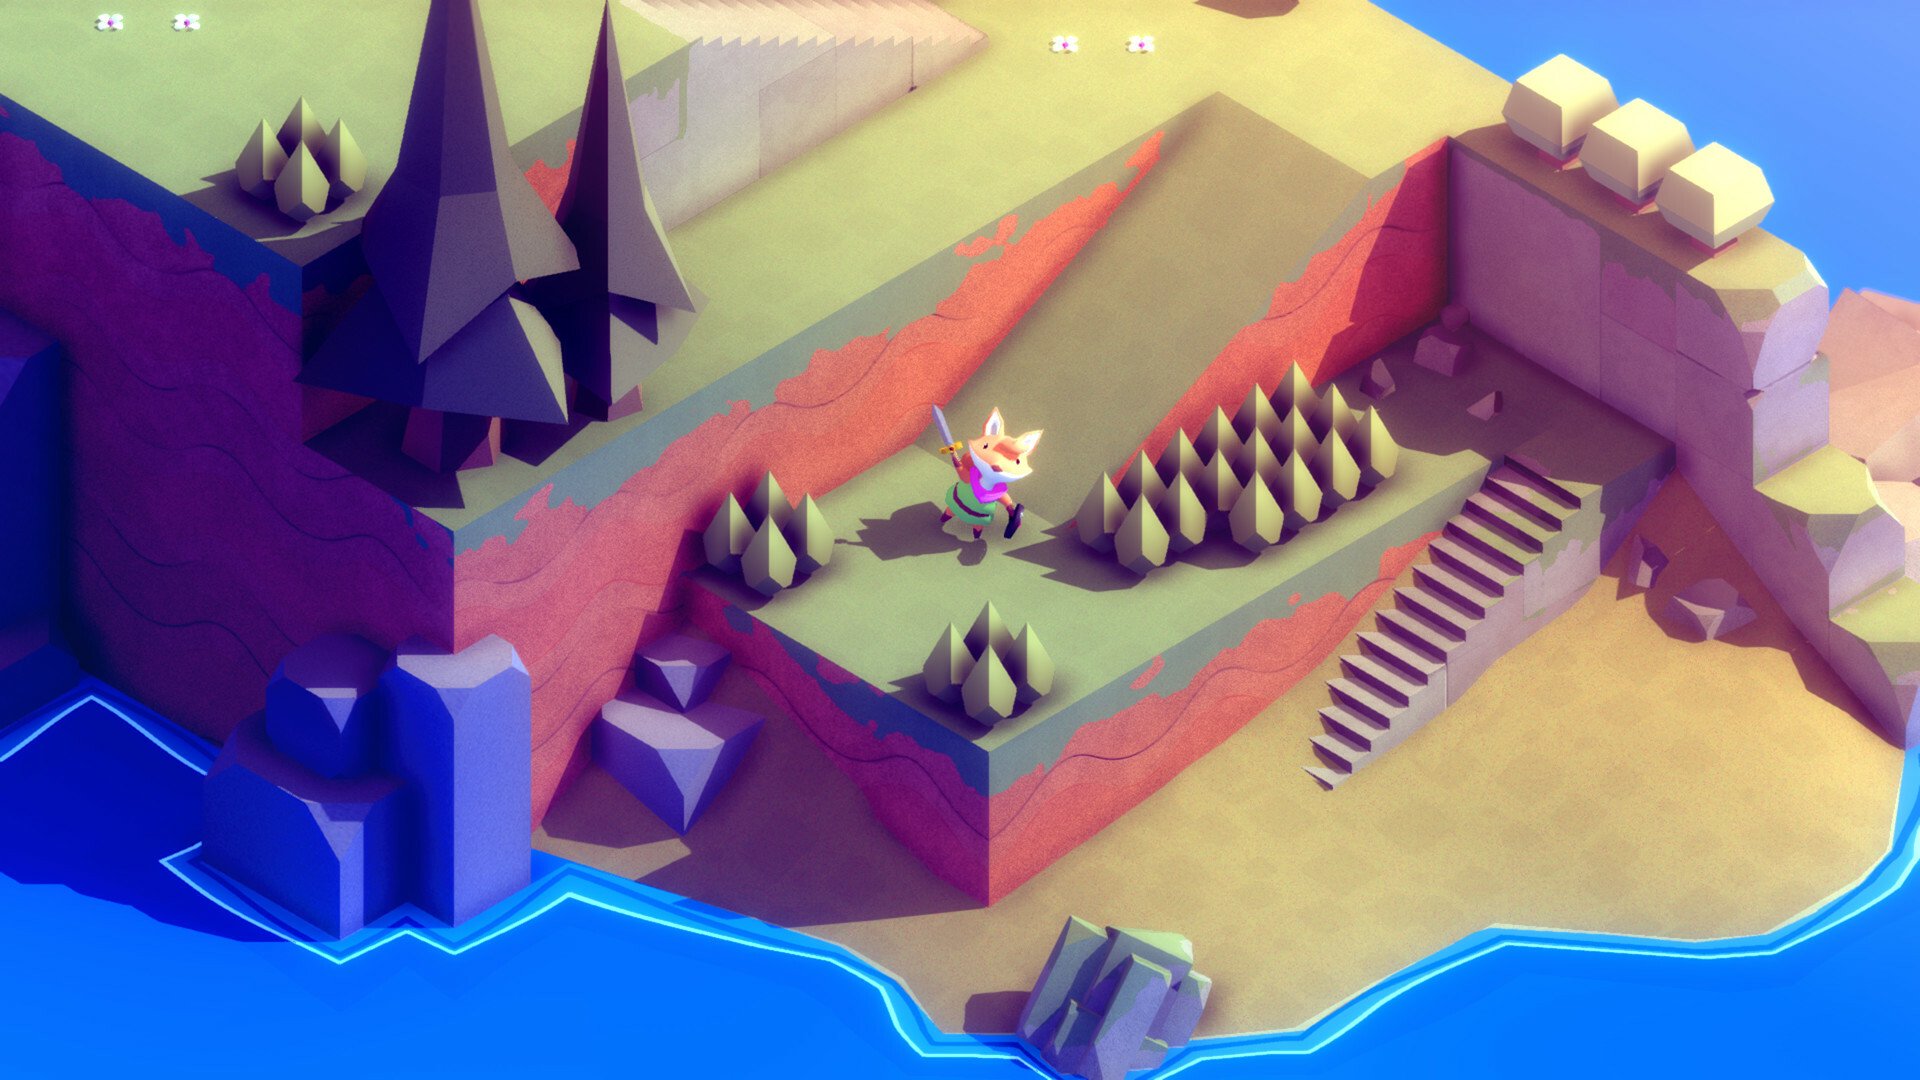 A screenshot from the video game "Tunic." A cartoon fox carrying a sword and shield is viewed from above in a polygonal beachside landscape.